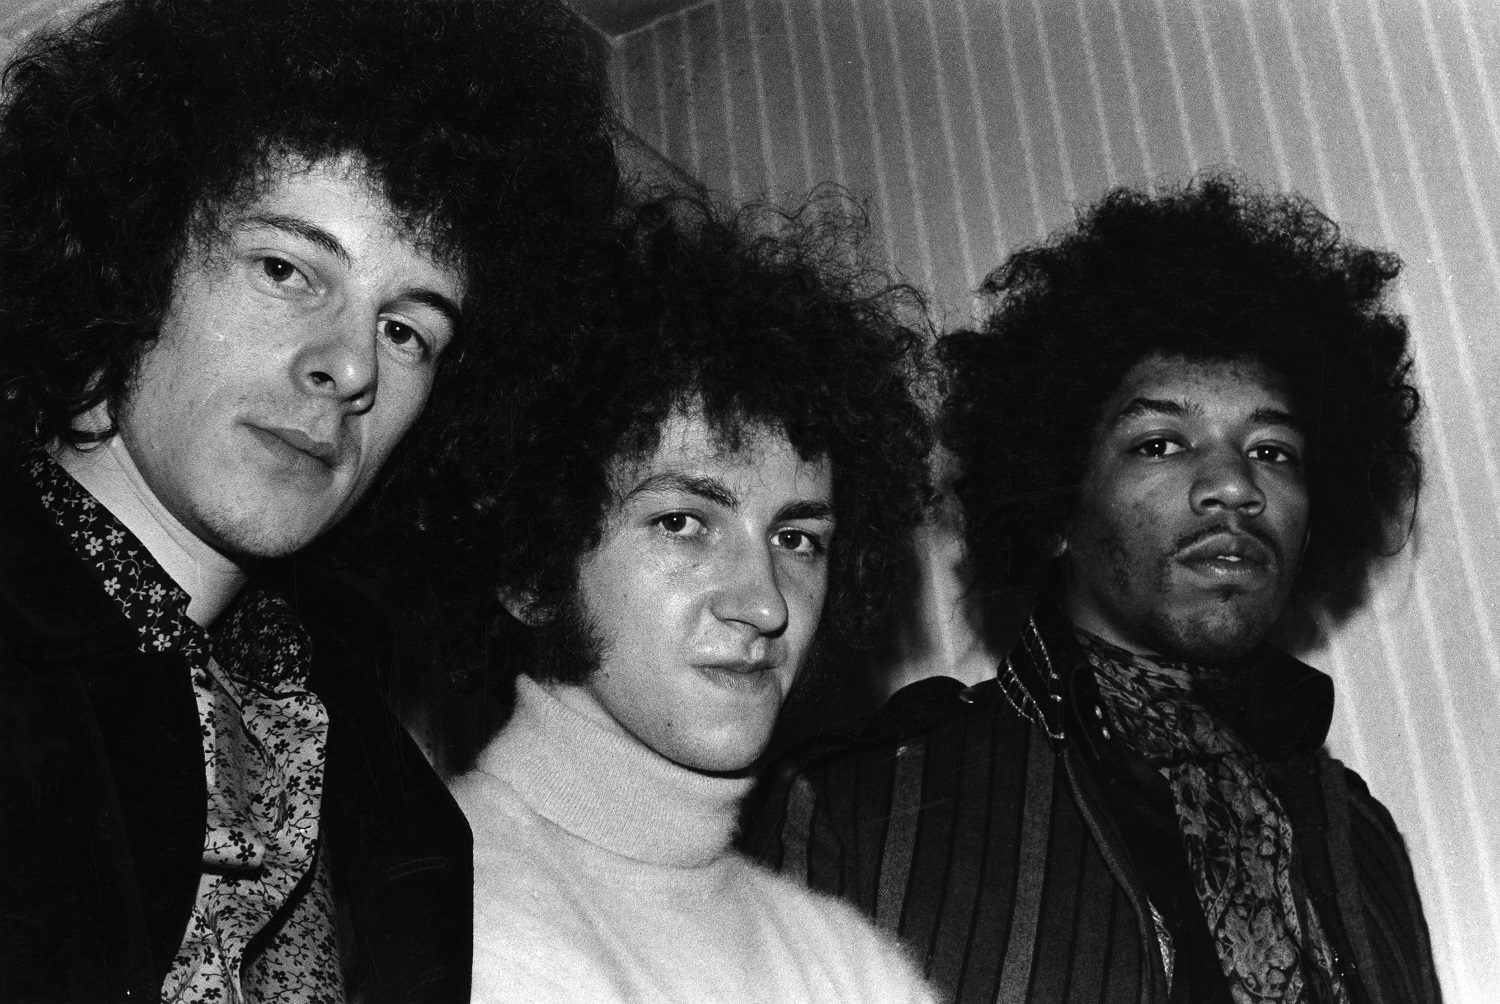 Jimi Hendrix poses for the camera with bandmates Mitch Mitchell and Noel Redding to his right, 1967